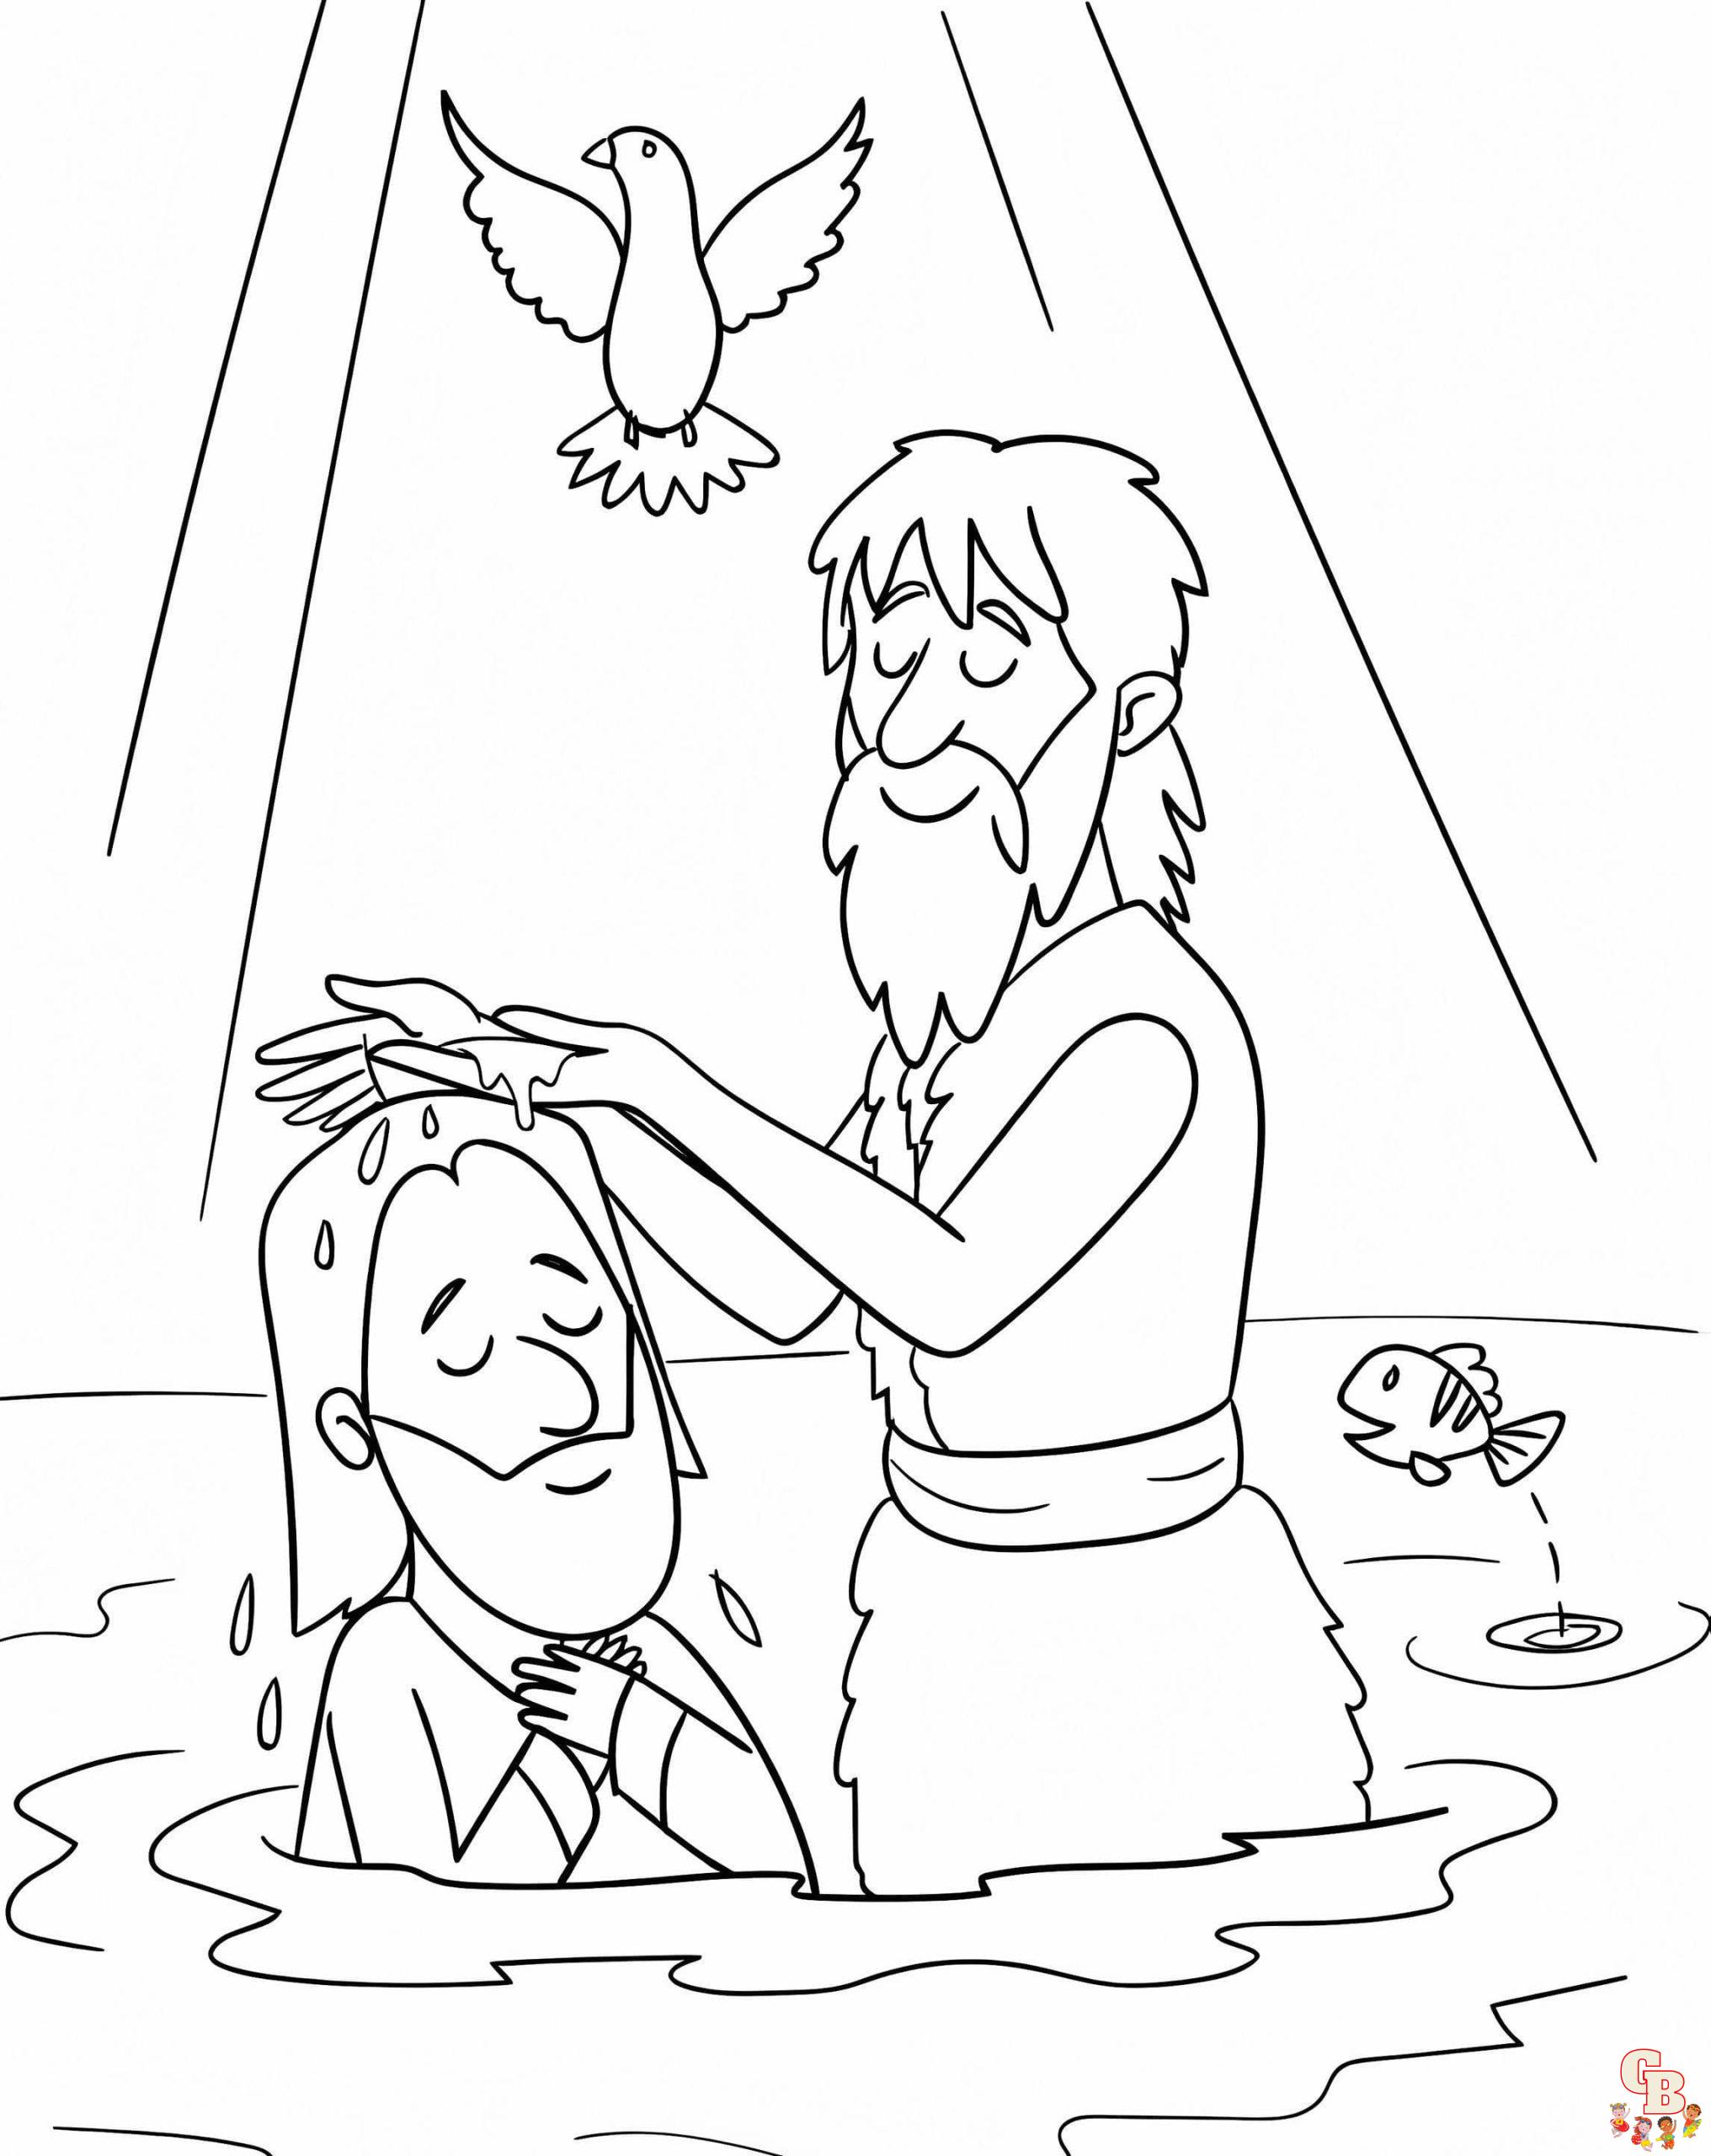 Baptism coloring pages printable free